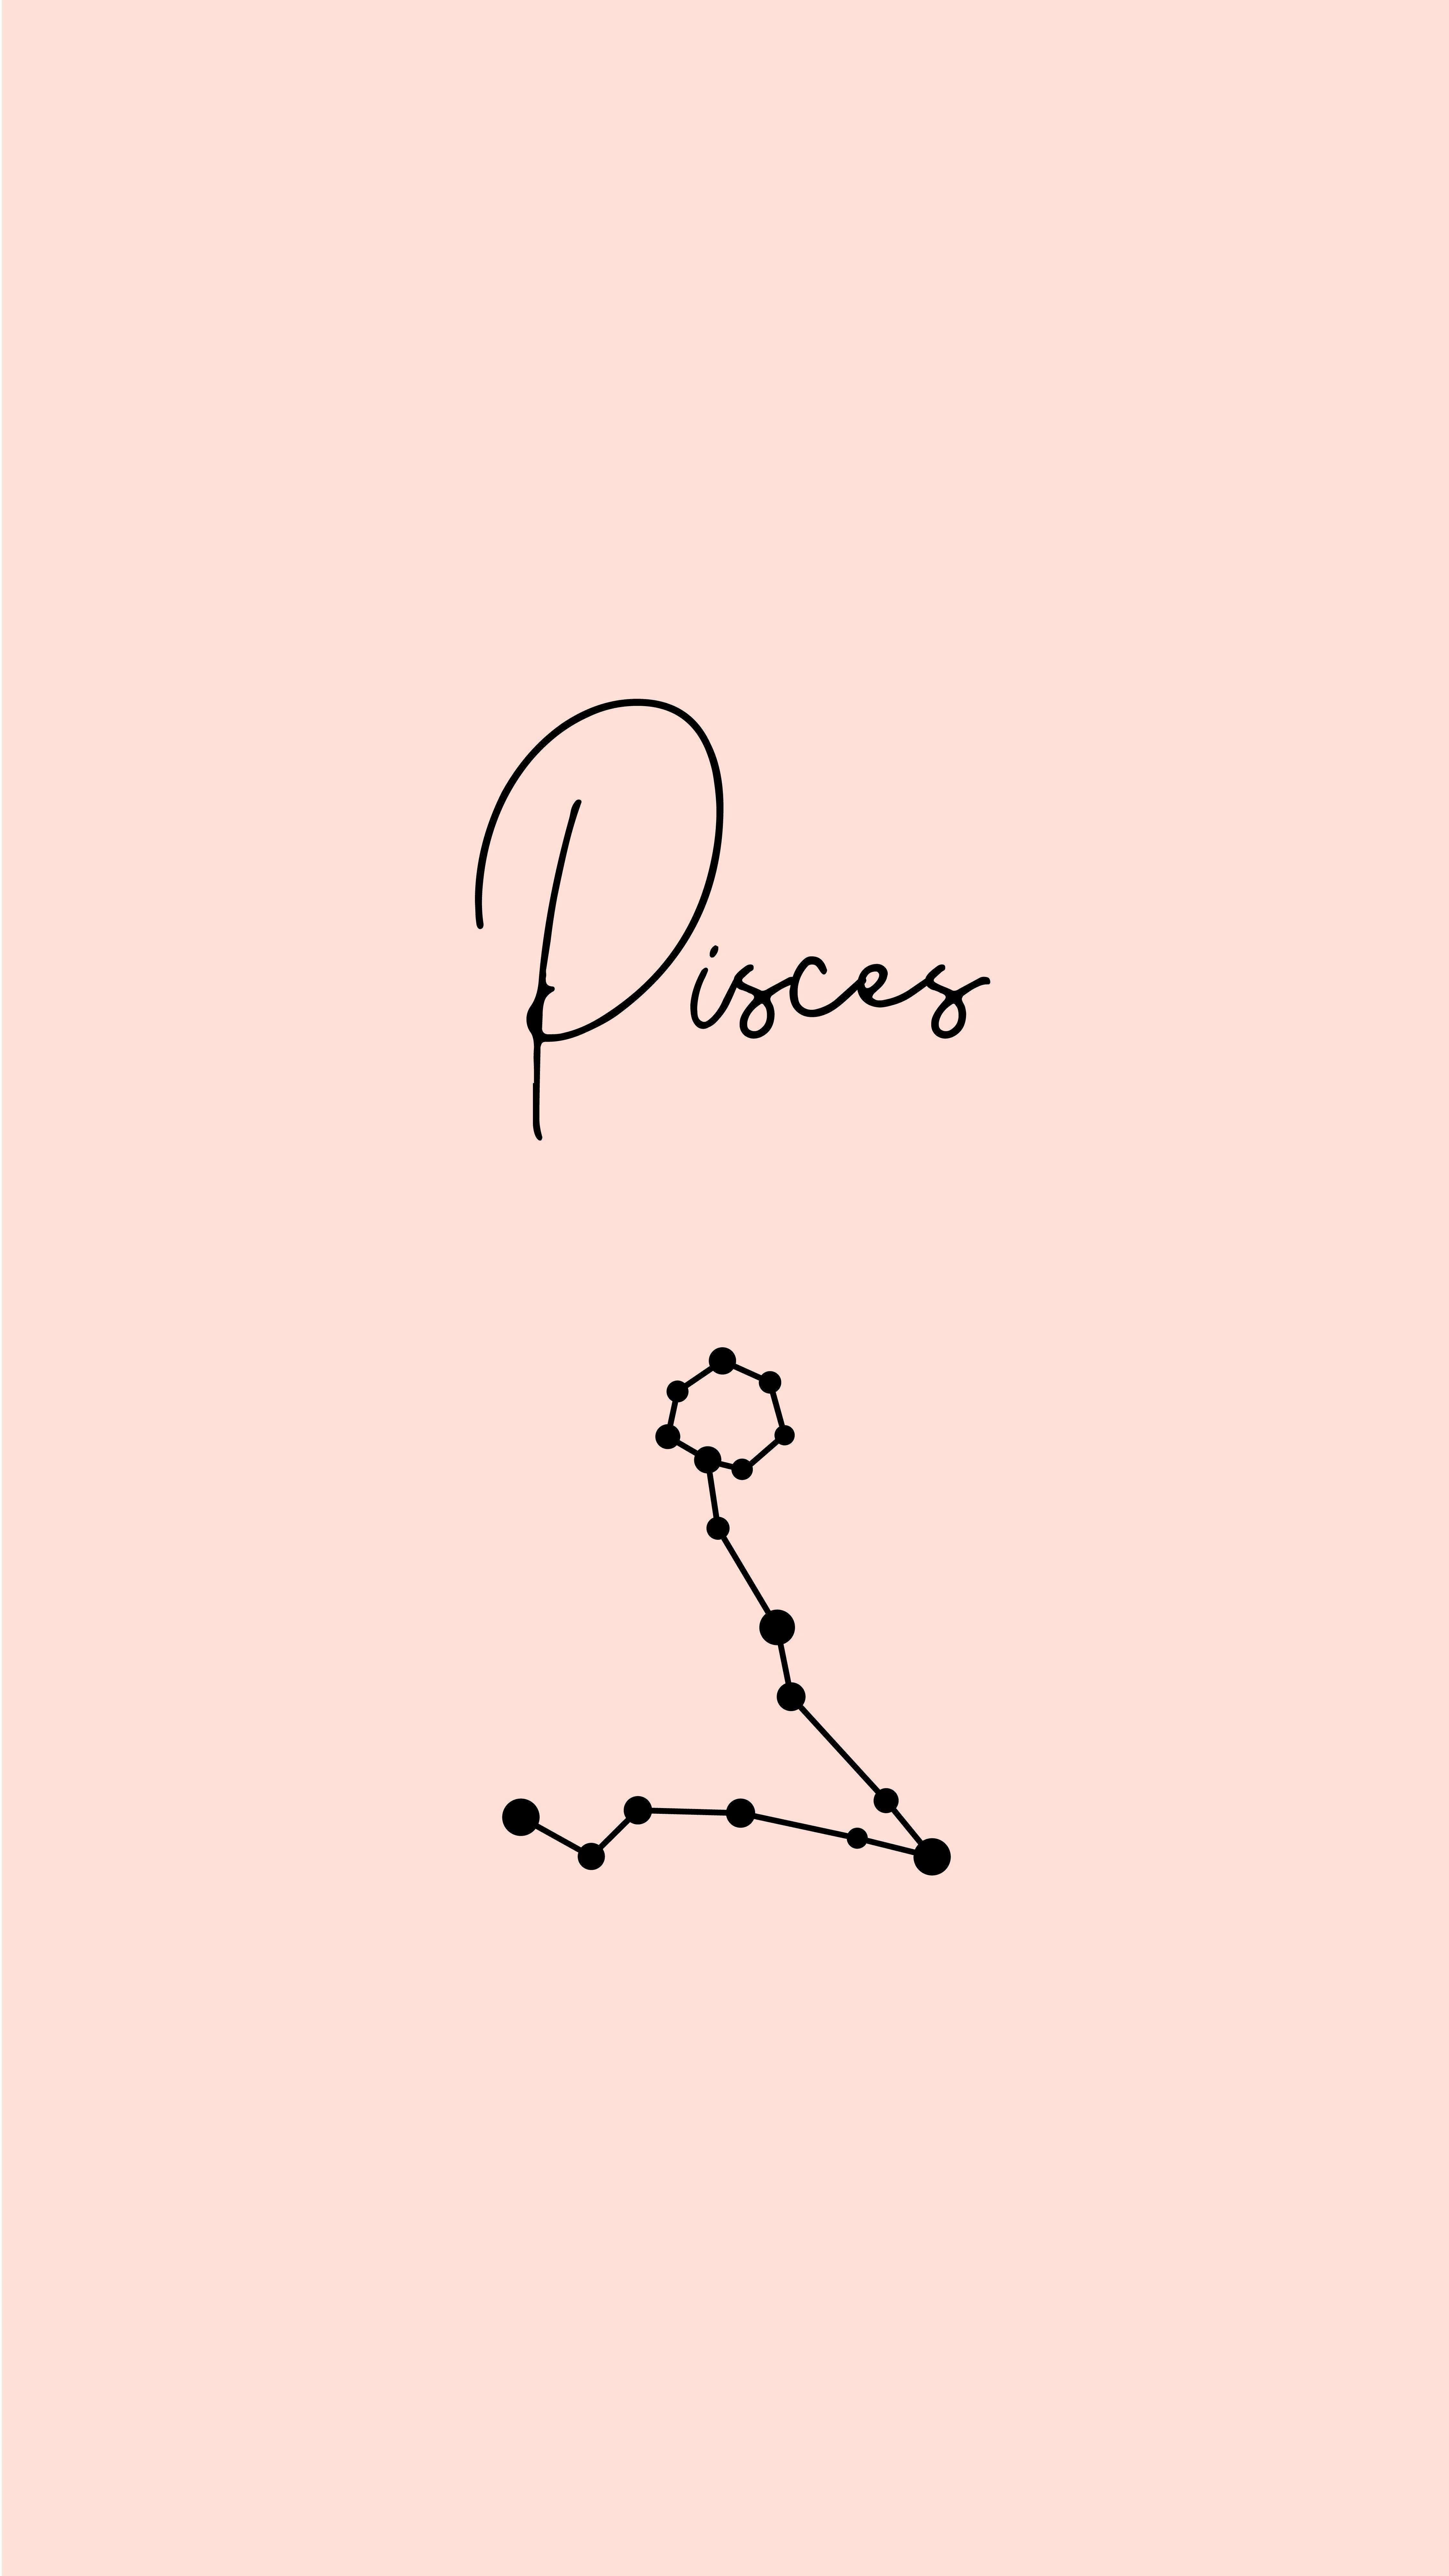 The pisces zodiac sign in black and white - Pisces